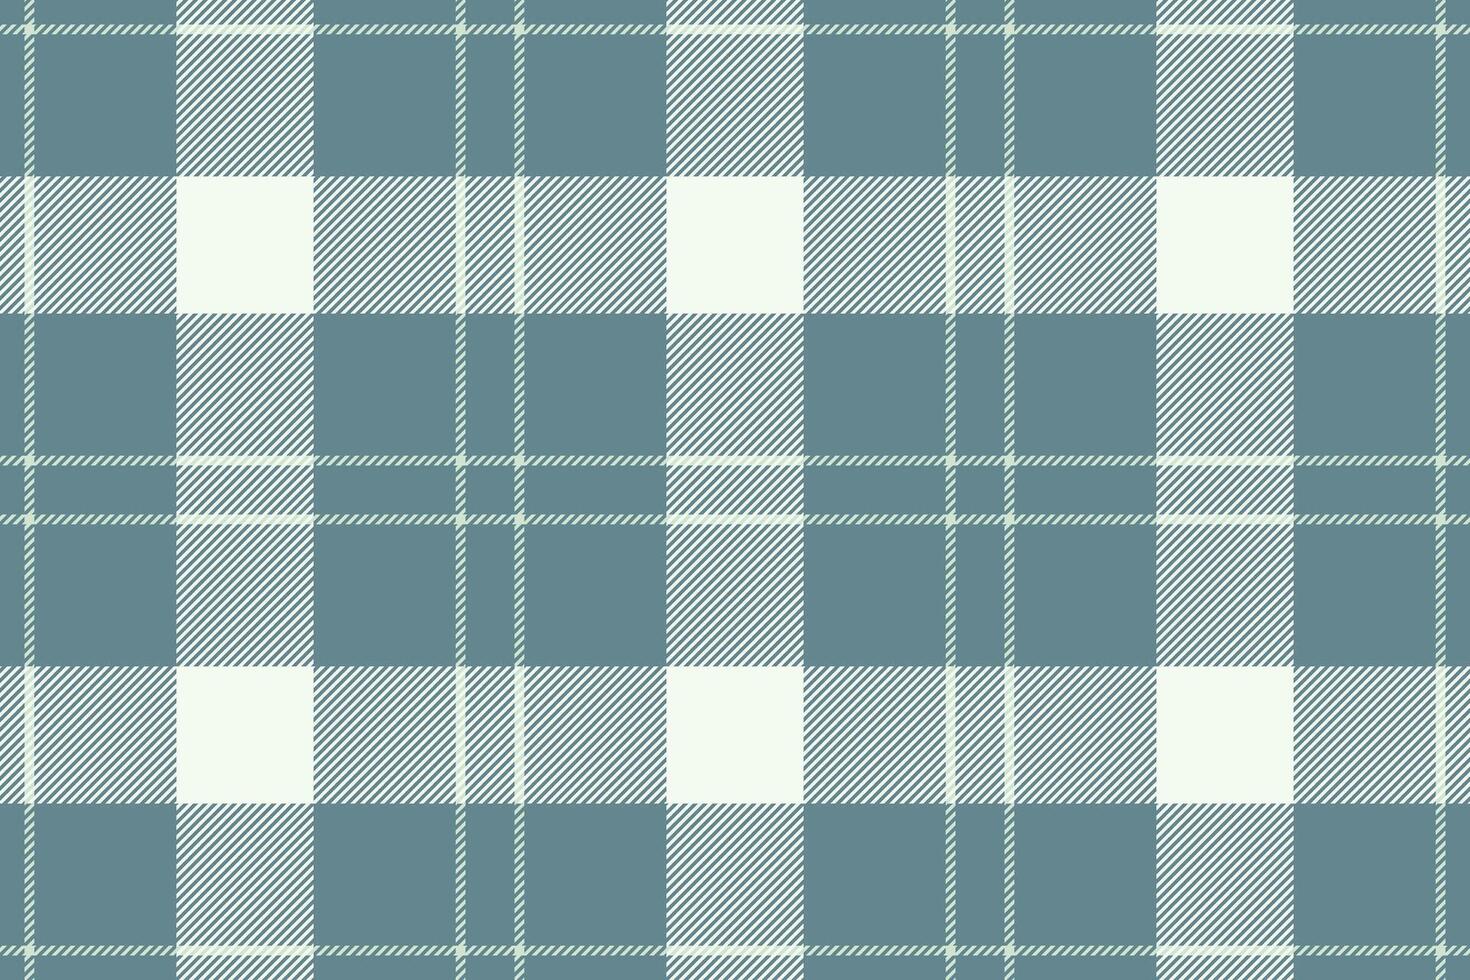 Fabric background vector of textile seamless plaid with a texture tartan pattern check.